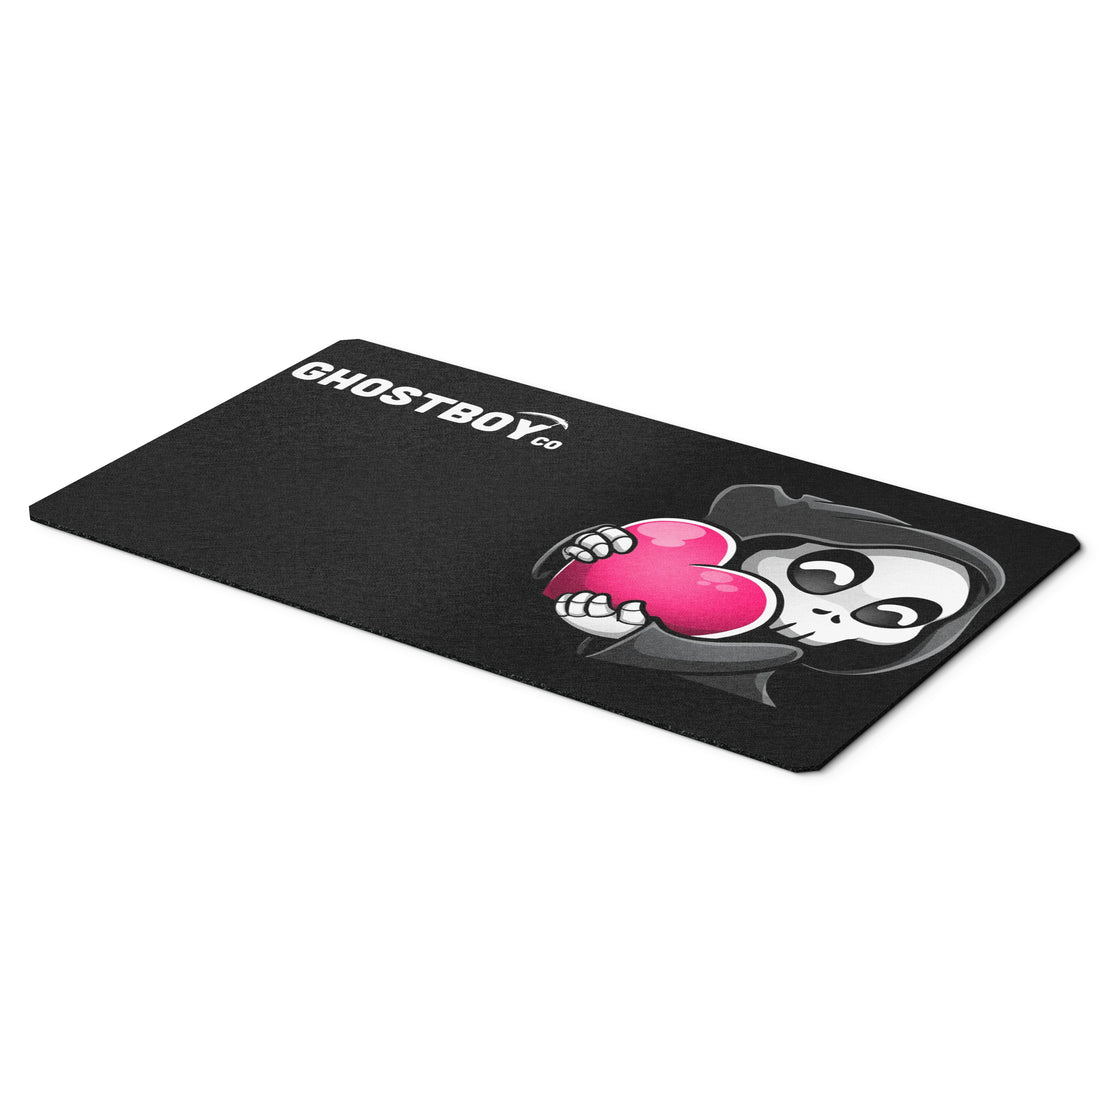 "Love" Ghostboy Gaming Mouse Pad